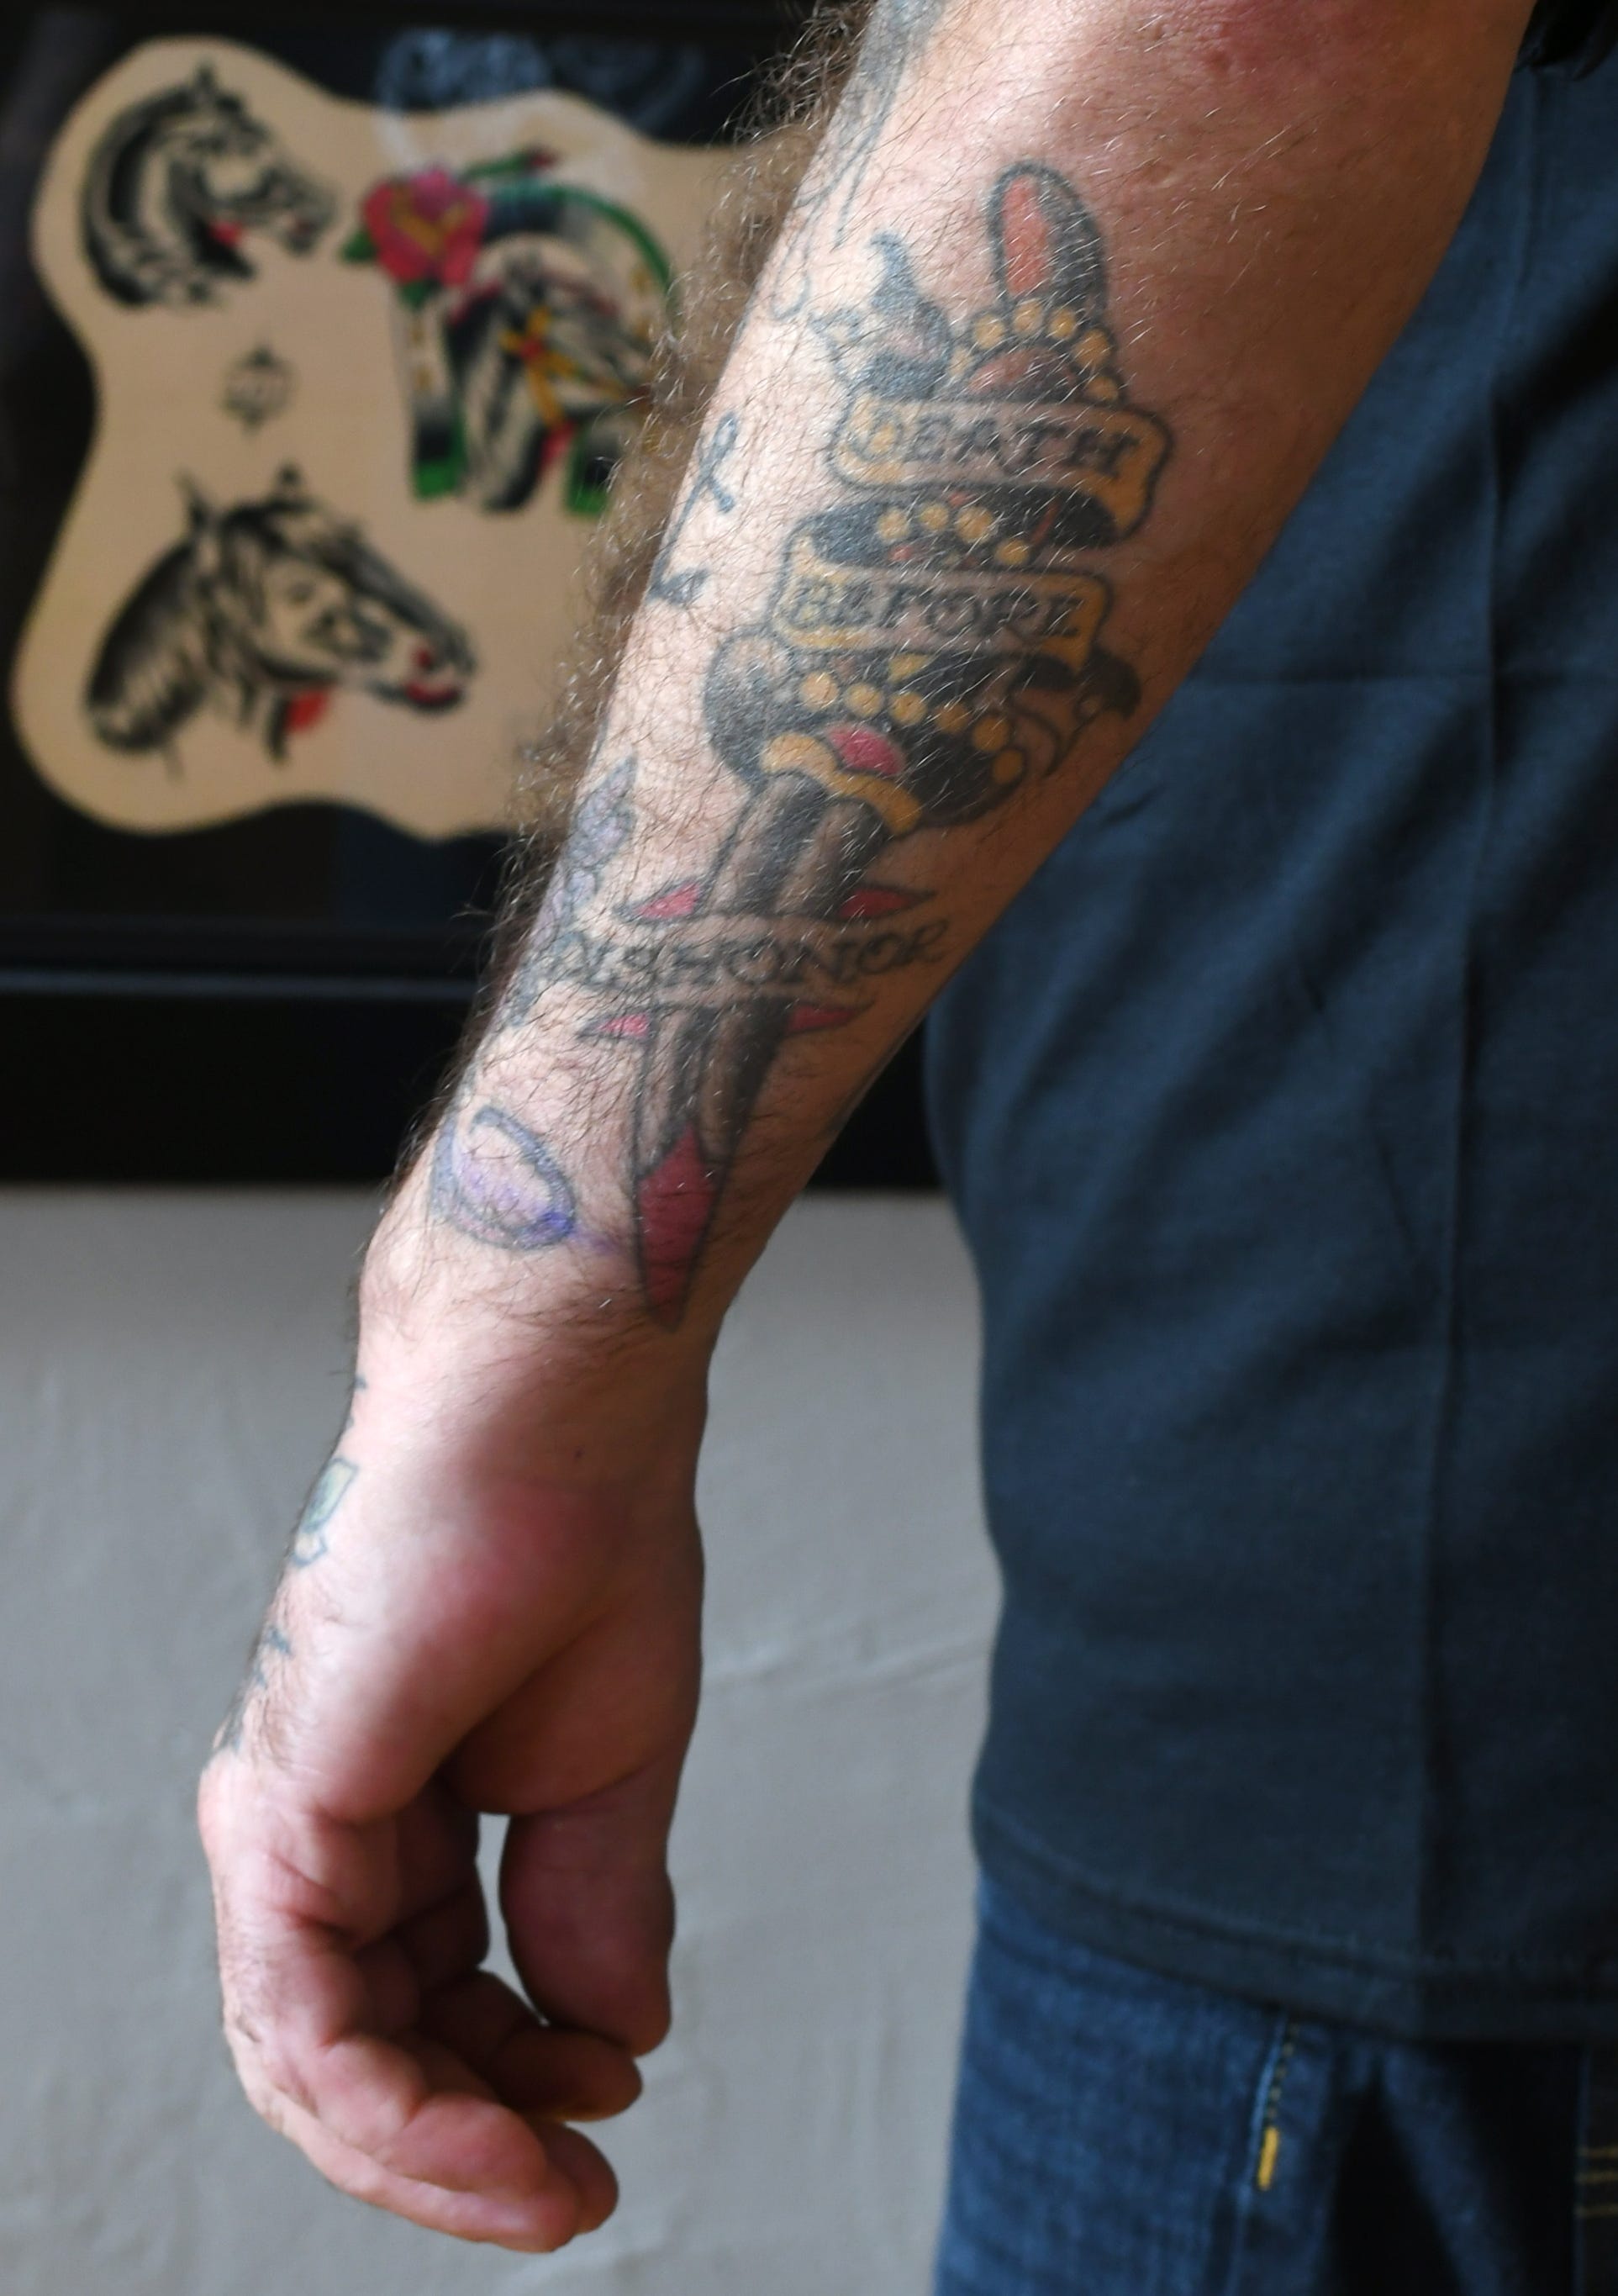 SLIDESHOW Some of the Best NYCThemed Tattoos From Across the 5 Boroughs   West Brighton  New York  DNAinfo